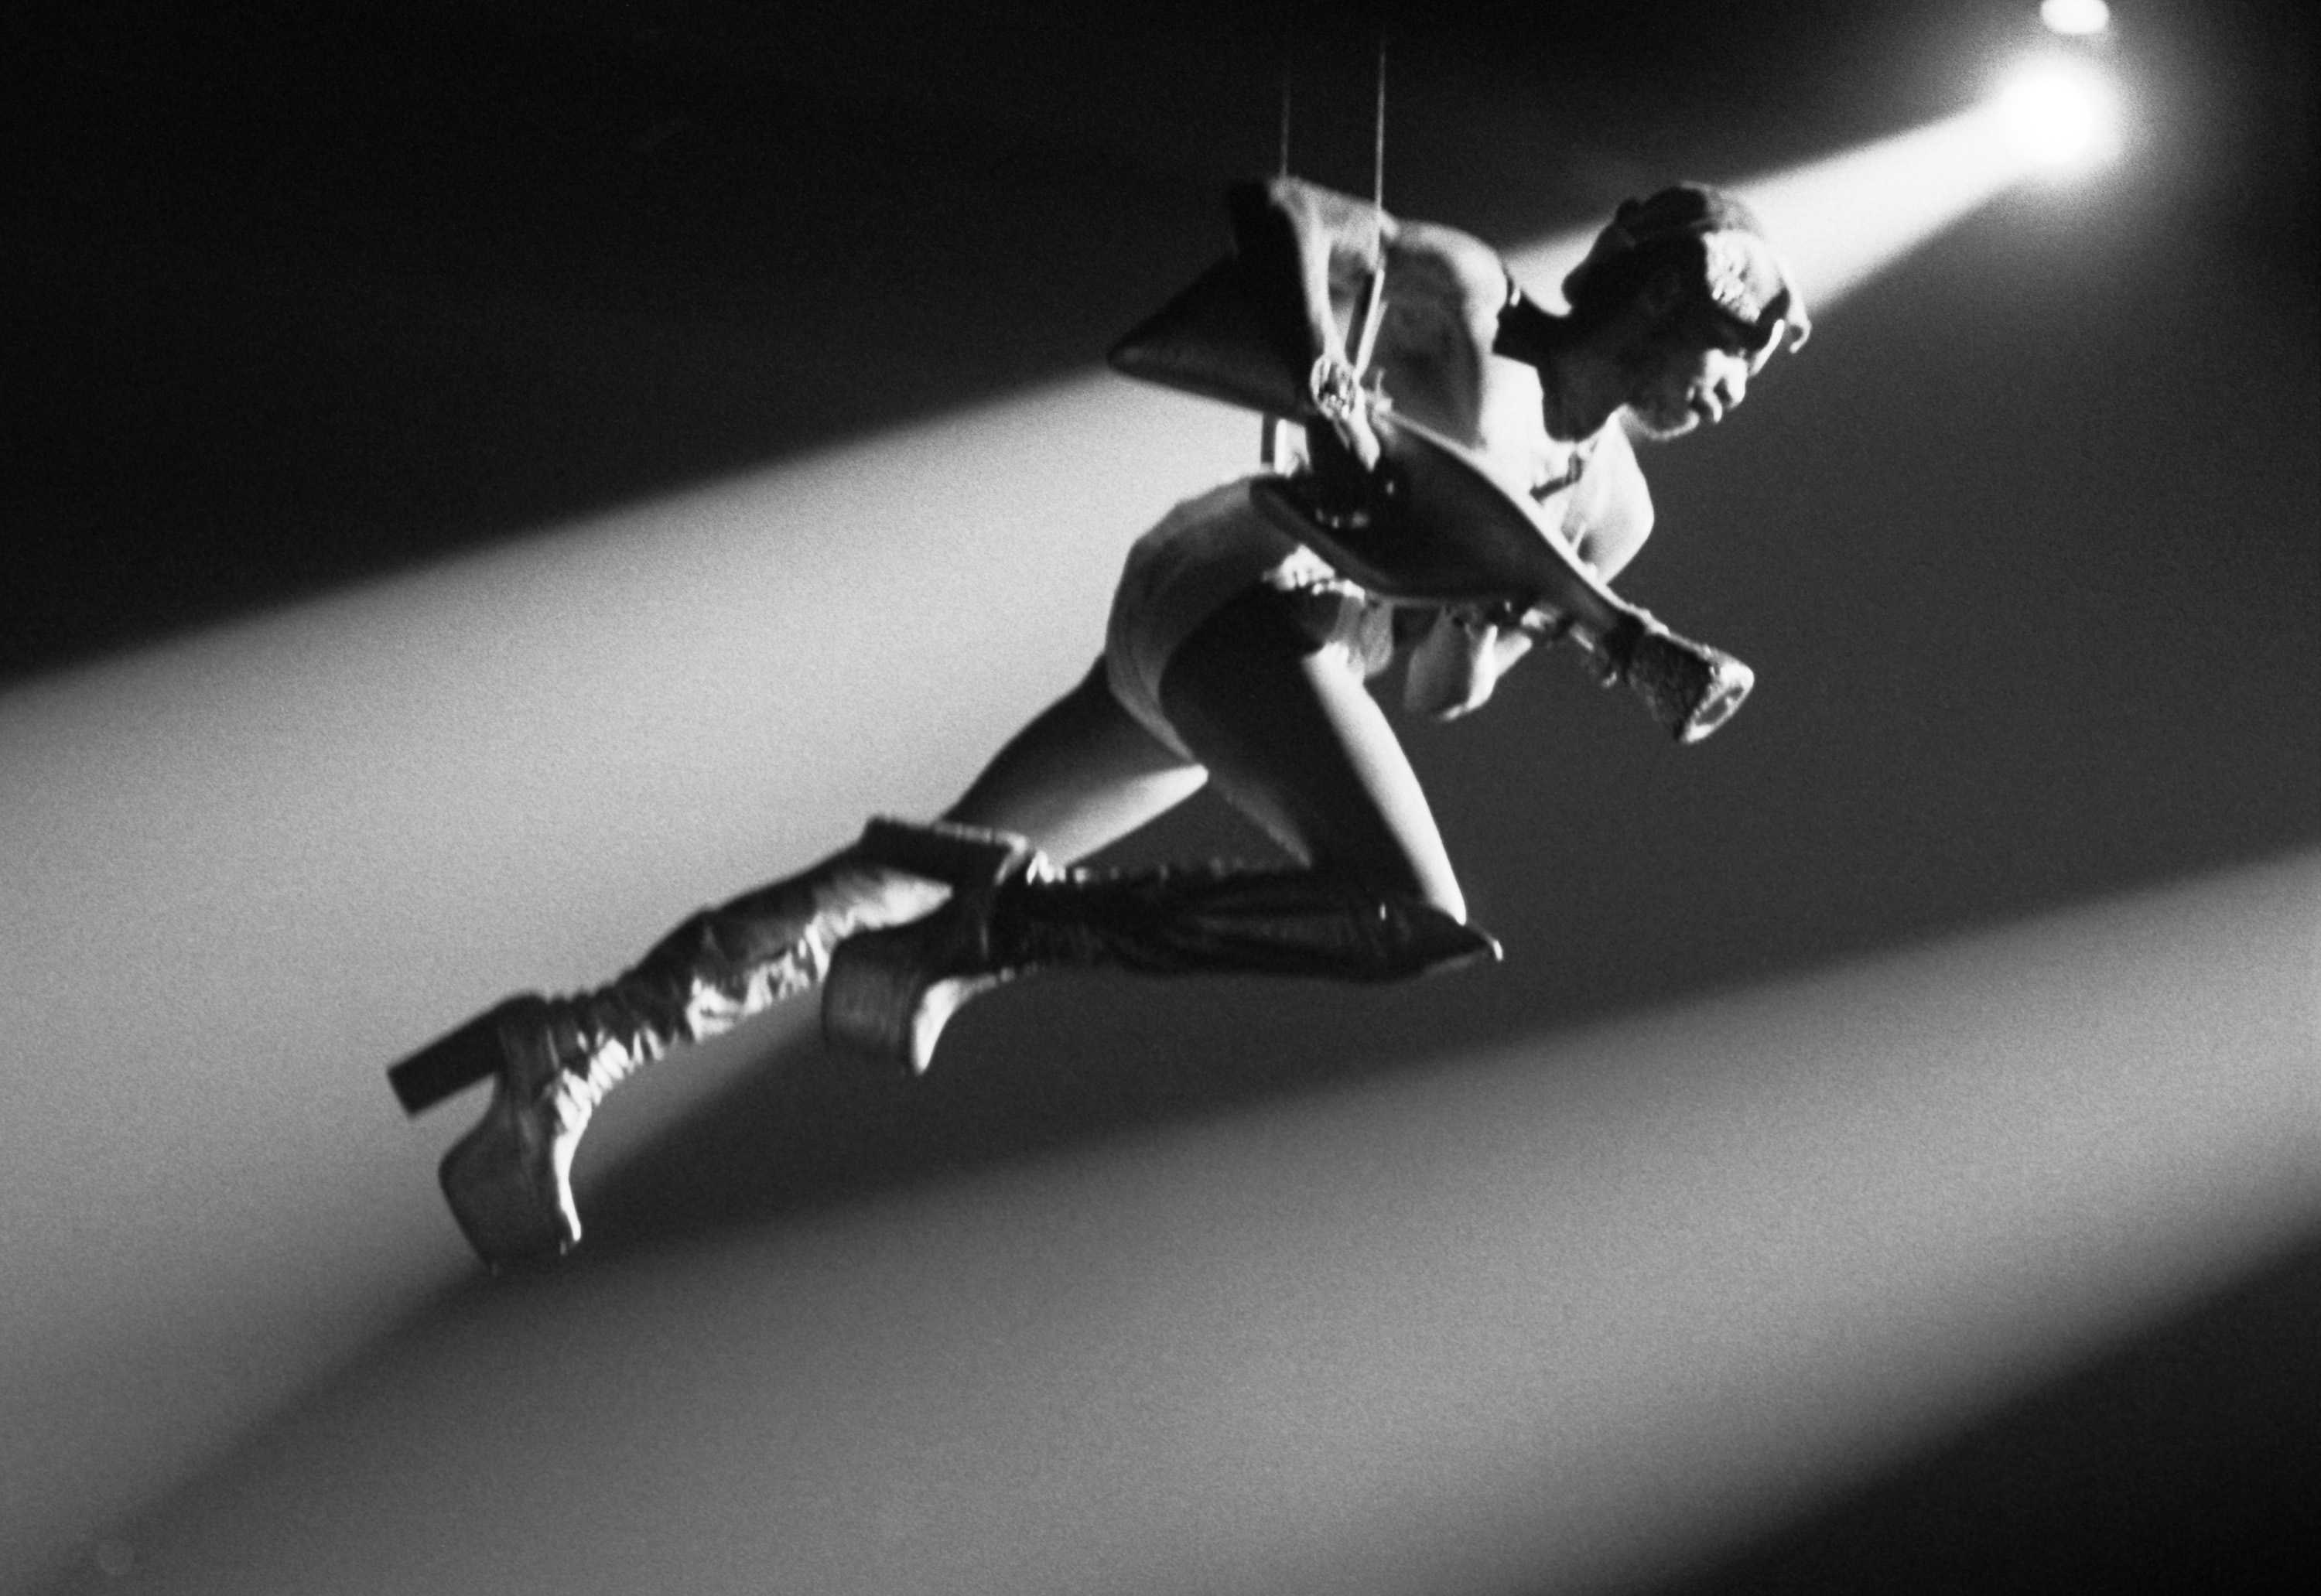 Garry Shider performing as Starchild while being suspended in the air in a black and white photo.